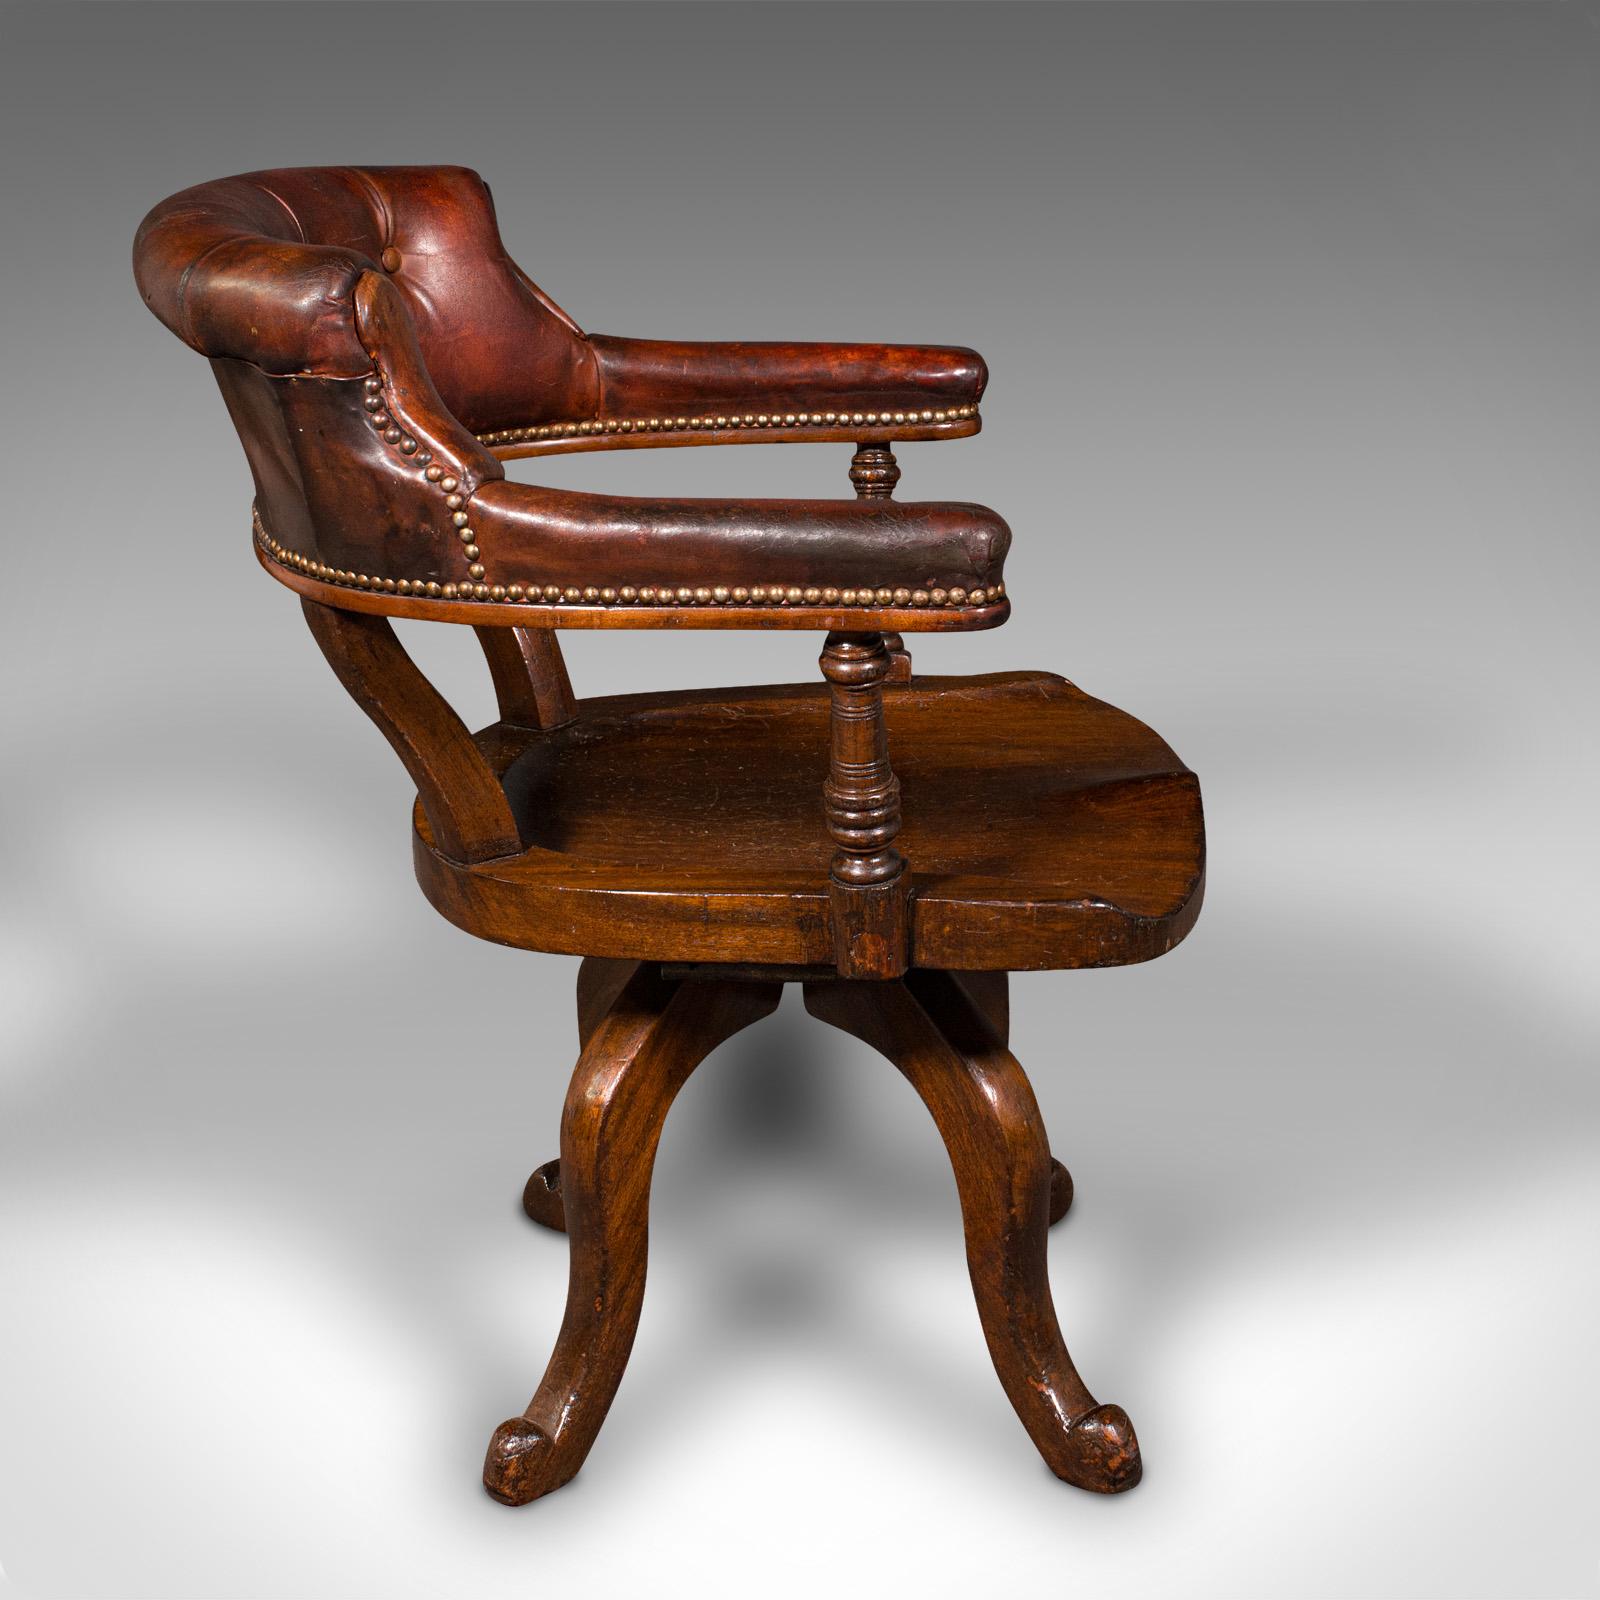 Antique Porter's Hall Chair, English, Leather, Rotary Desk Seat, Victorian, 1880 In Good Condition For Sale In Hele, Devon, GB